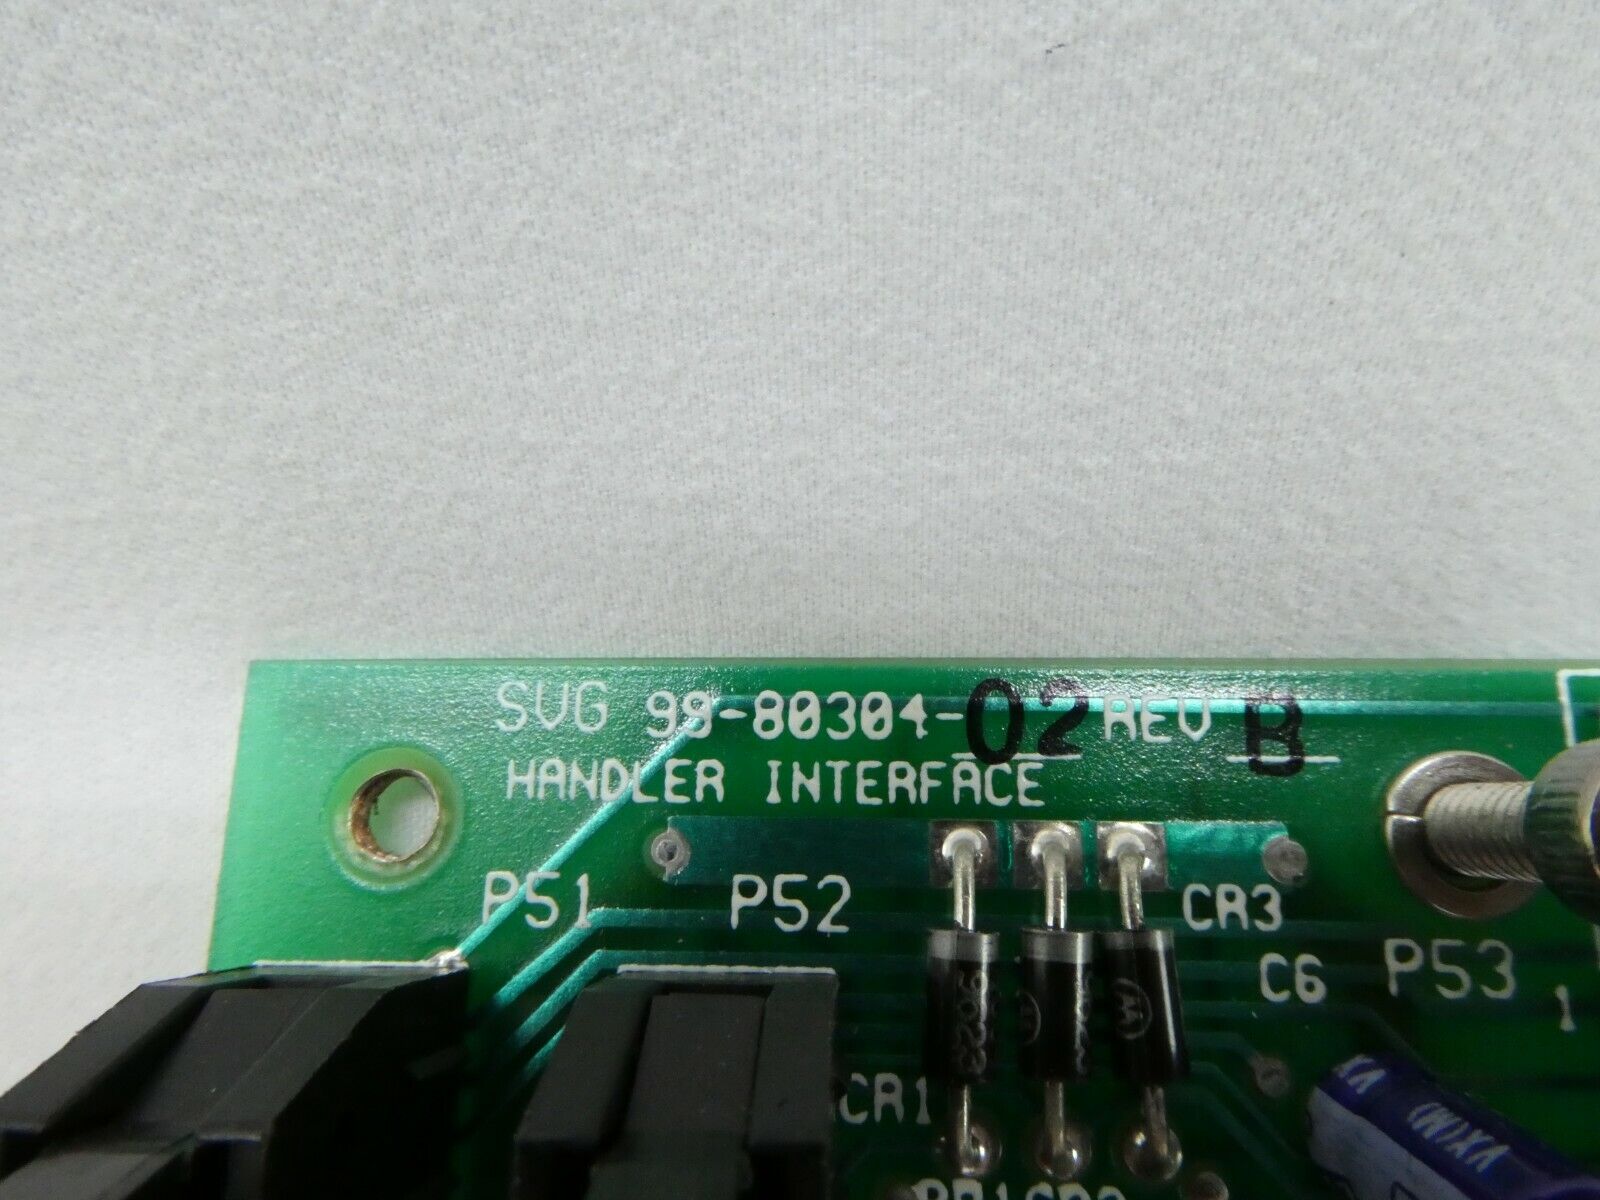 SVG Silicon Valley Group 99-80304-02 Receiver-Handler Interface PCB Working